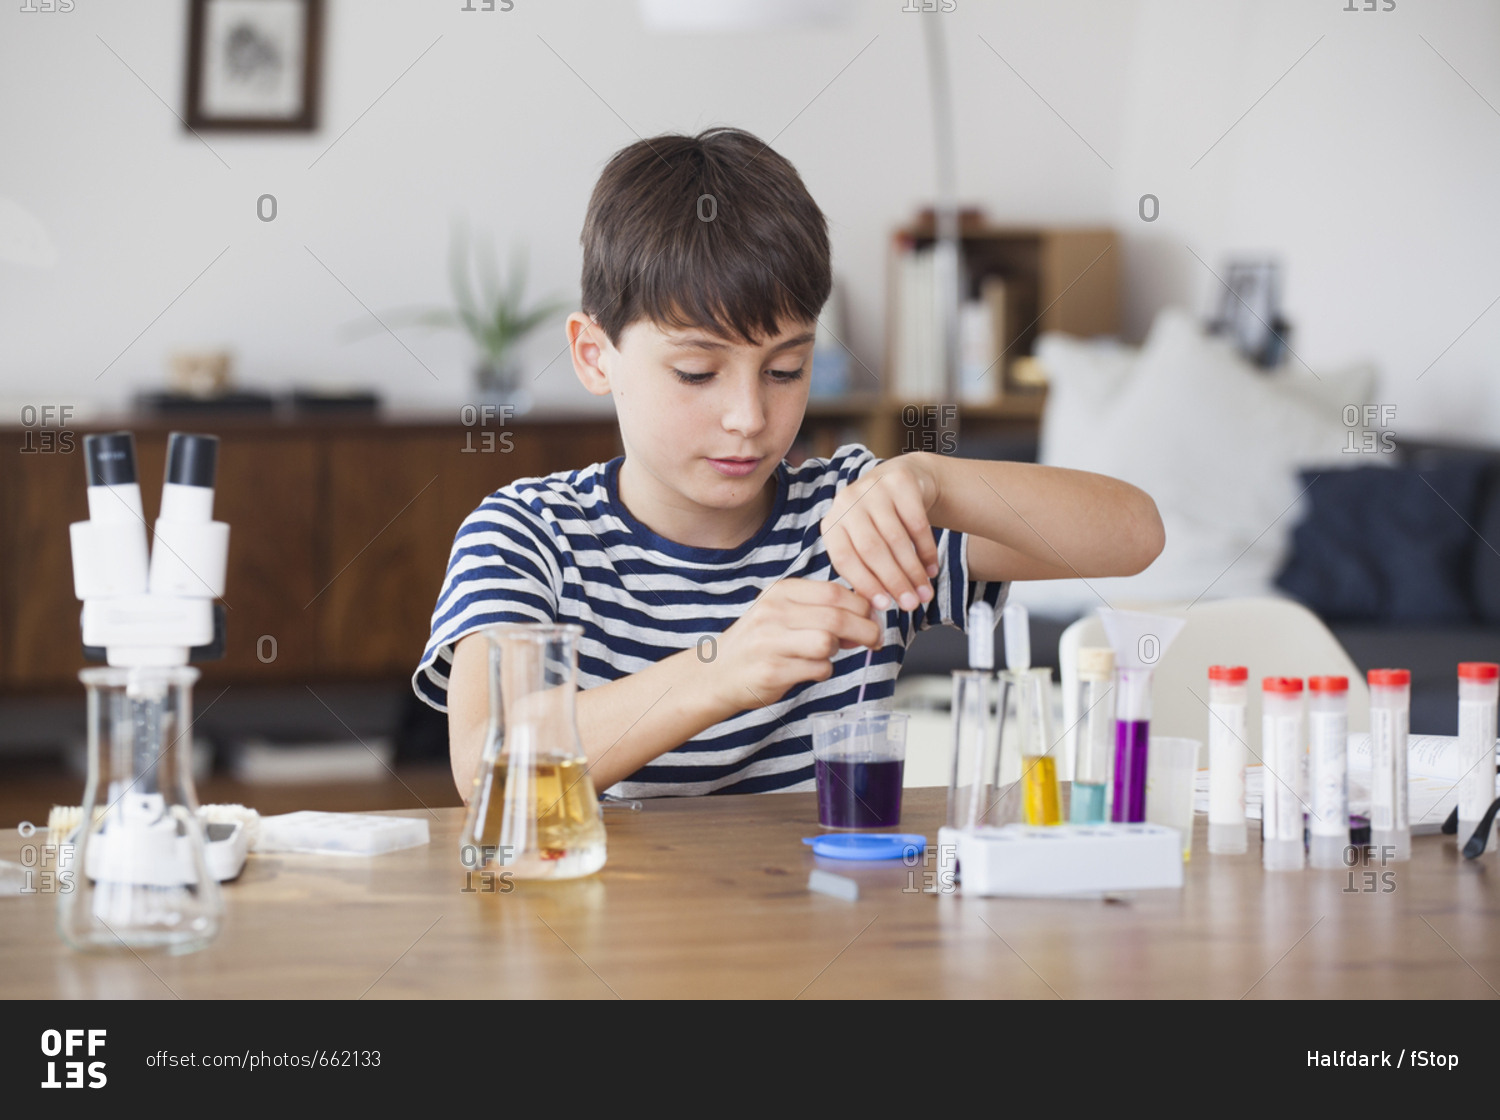 Boy concentrating on school science project at table